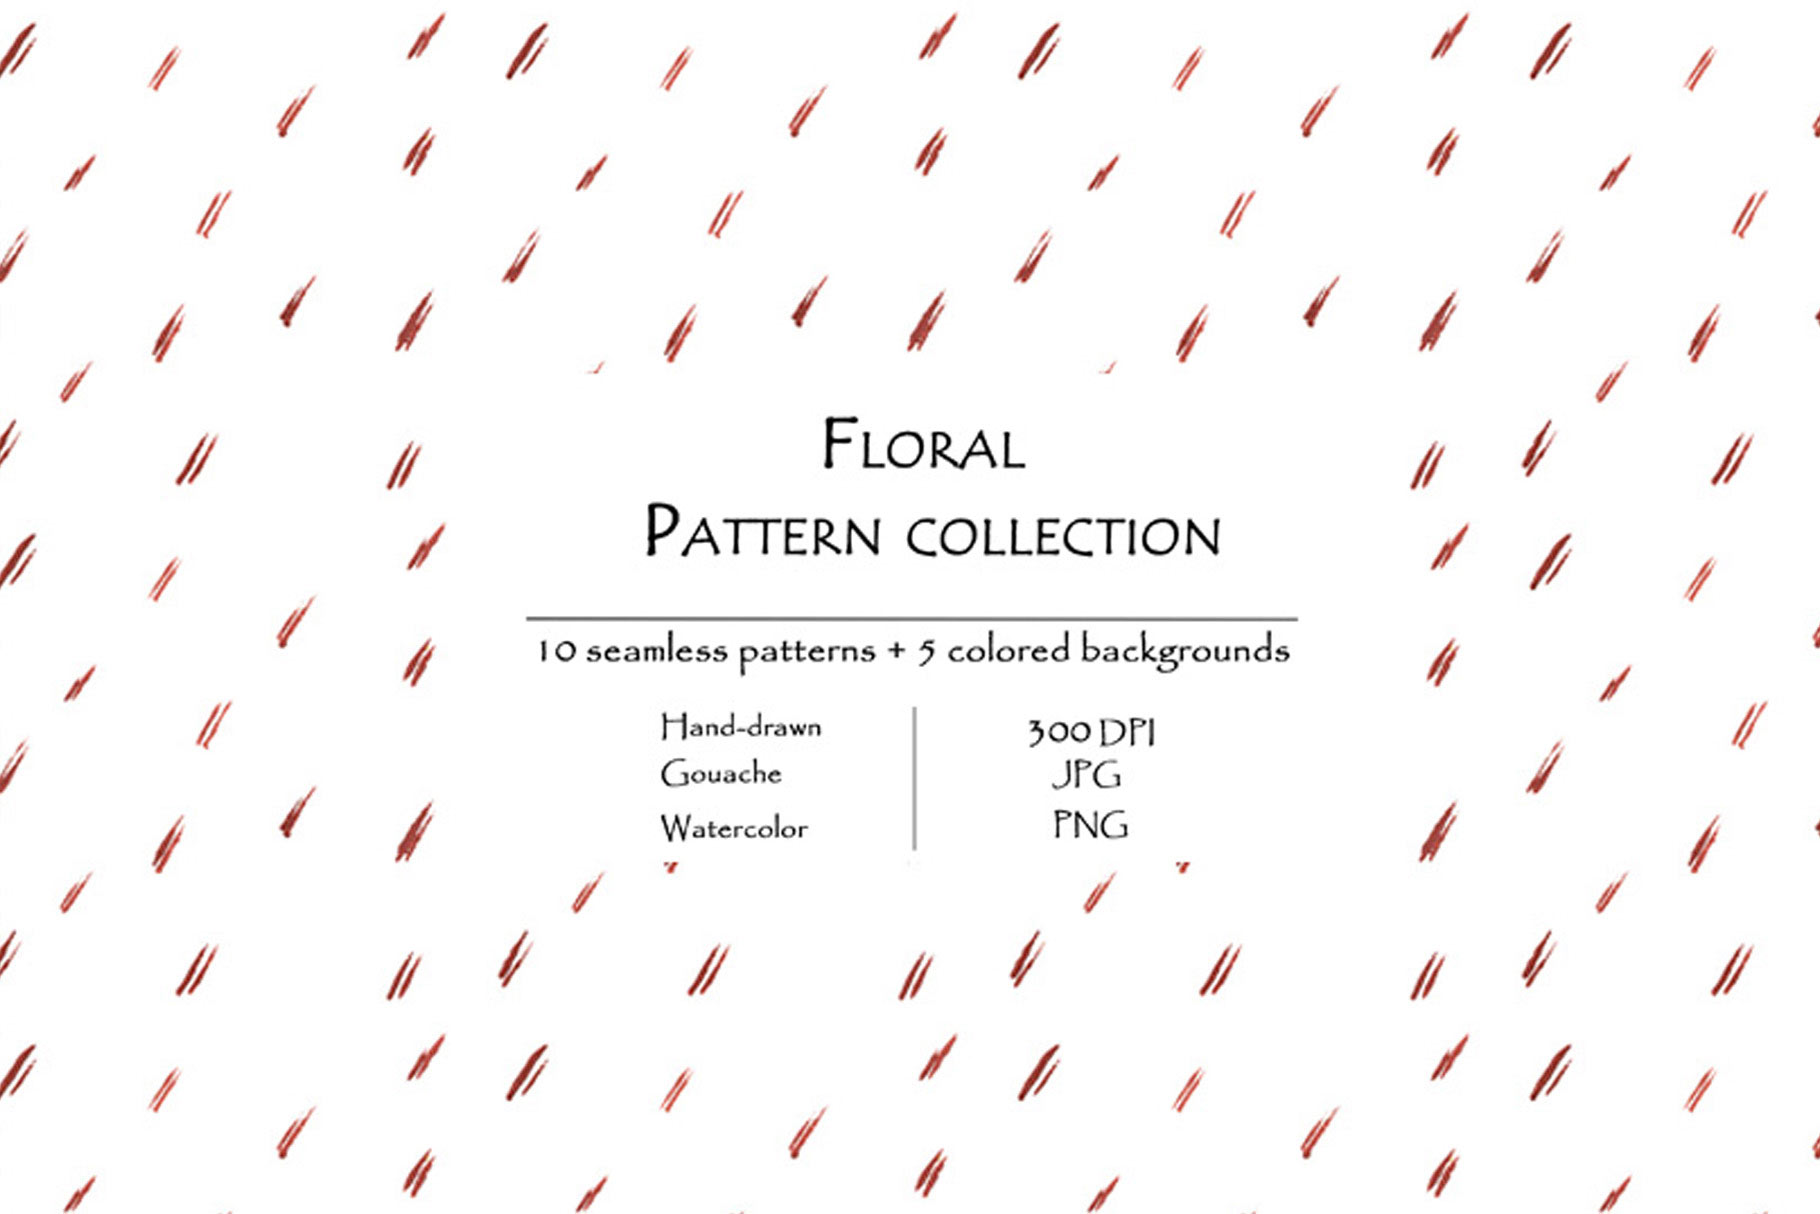 Floral Pattern Collection Of 10 Seamless Patterns And 5 Colored Backgrounds Pattern Example.